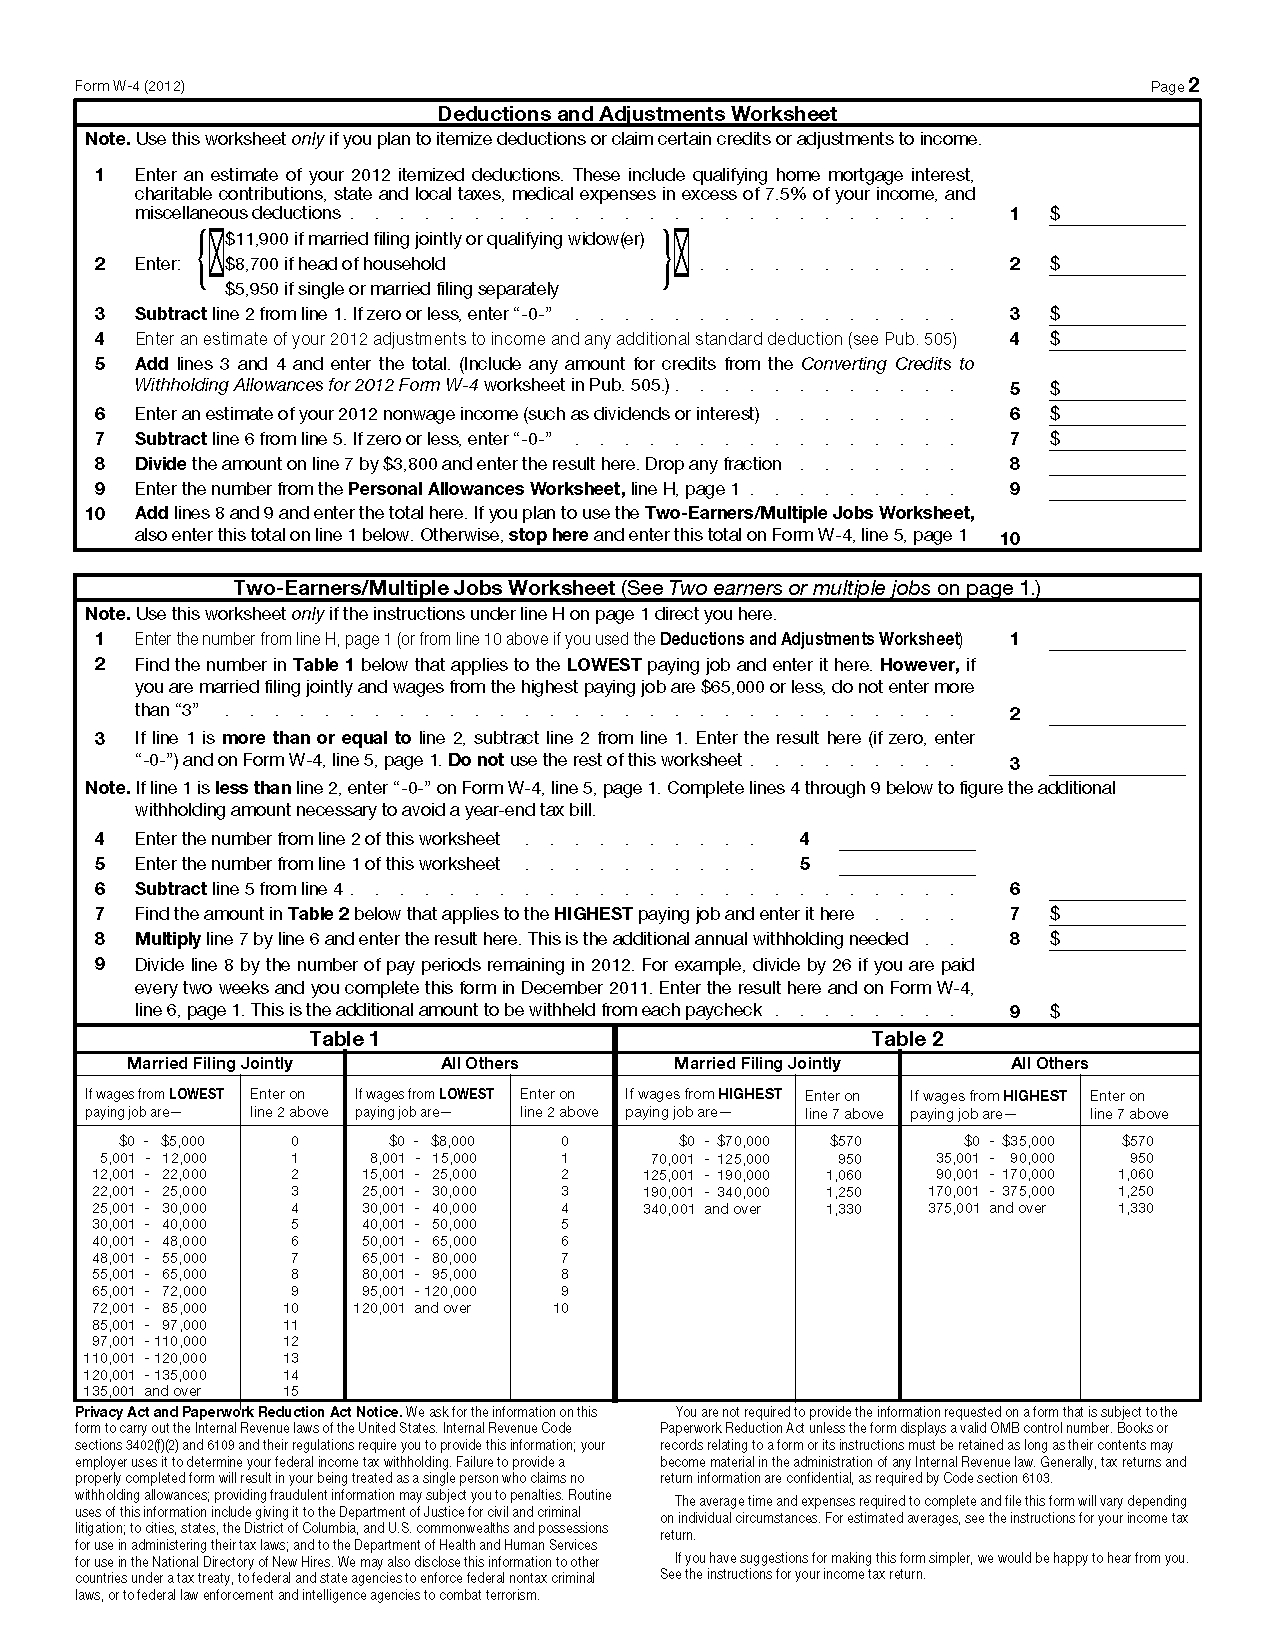 Instructions For The Two Earners Multiple Jobs Worksheet